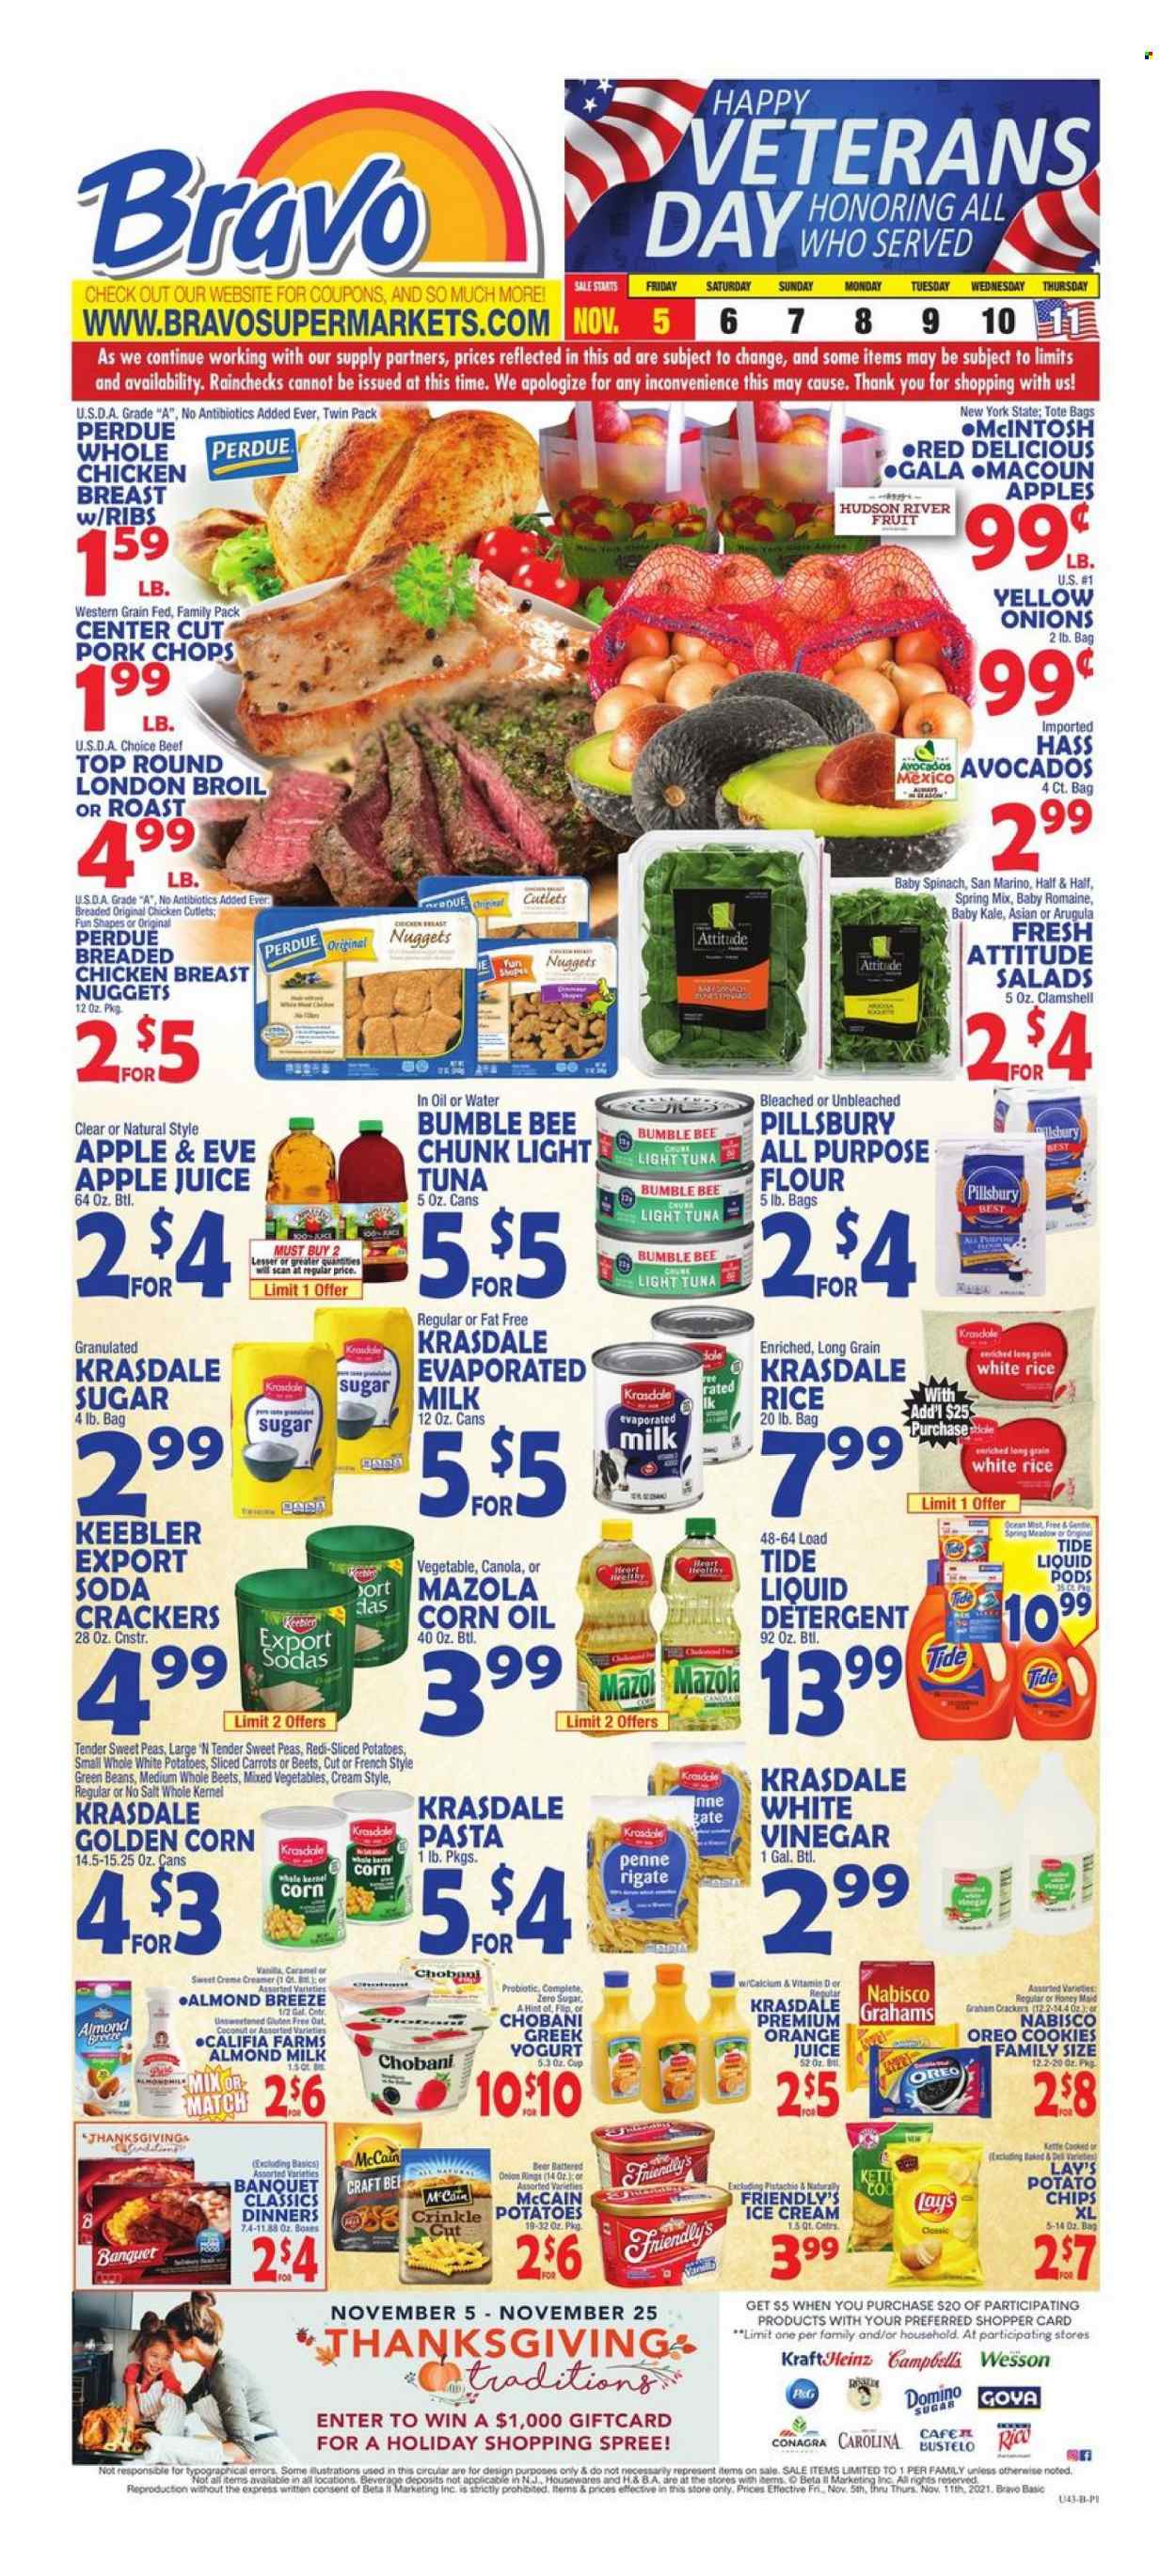 thumbnail - Bravo Supermarkets Flyer - 11/05/2021 - 11/11/2021 - Sales products - carrots, green beans, spinach, kale, potatoes, onion, avocado, coconut, tuna, nuggets, pasta, Bumble Bee, fried chicken, Pillsbury, chicken nuggets, Perdue®, greek yoghurt, Oreo, yoghurt, Chobani, almond milk, Almond Breeze, creamer, ice cream, Friendly's Ice Cream, mixed vegetables, McCain, cookies, graham crackers, crackers, Keebler, chips, Lay’s, all purpose flour, flour, oats, light tuna, Honey Maid, rice, white rice, penne, corn oil, apple juice, orange juice, juice, soda, beer, whole chicken, chicken cutlets, pork chops, pork meat, detergent, Gain, Tide, Half and half. Page 1.